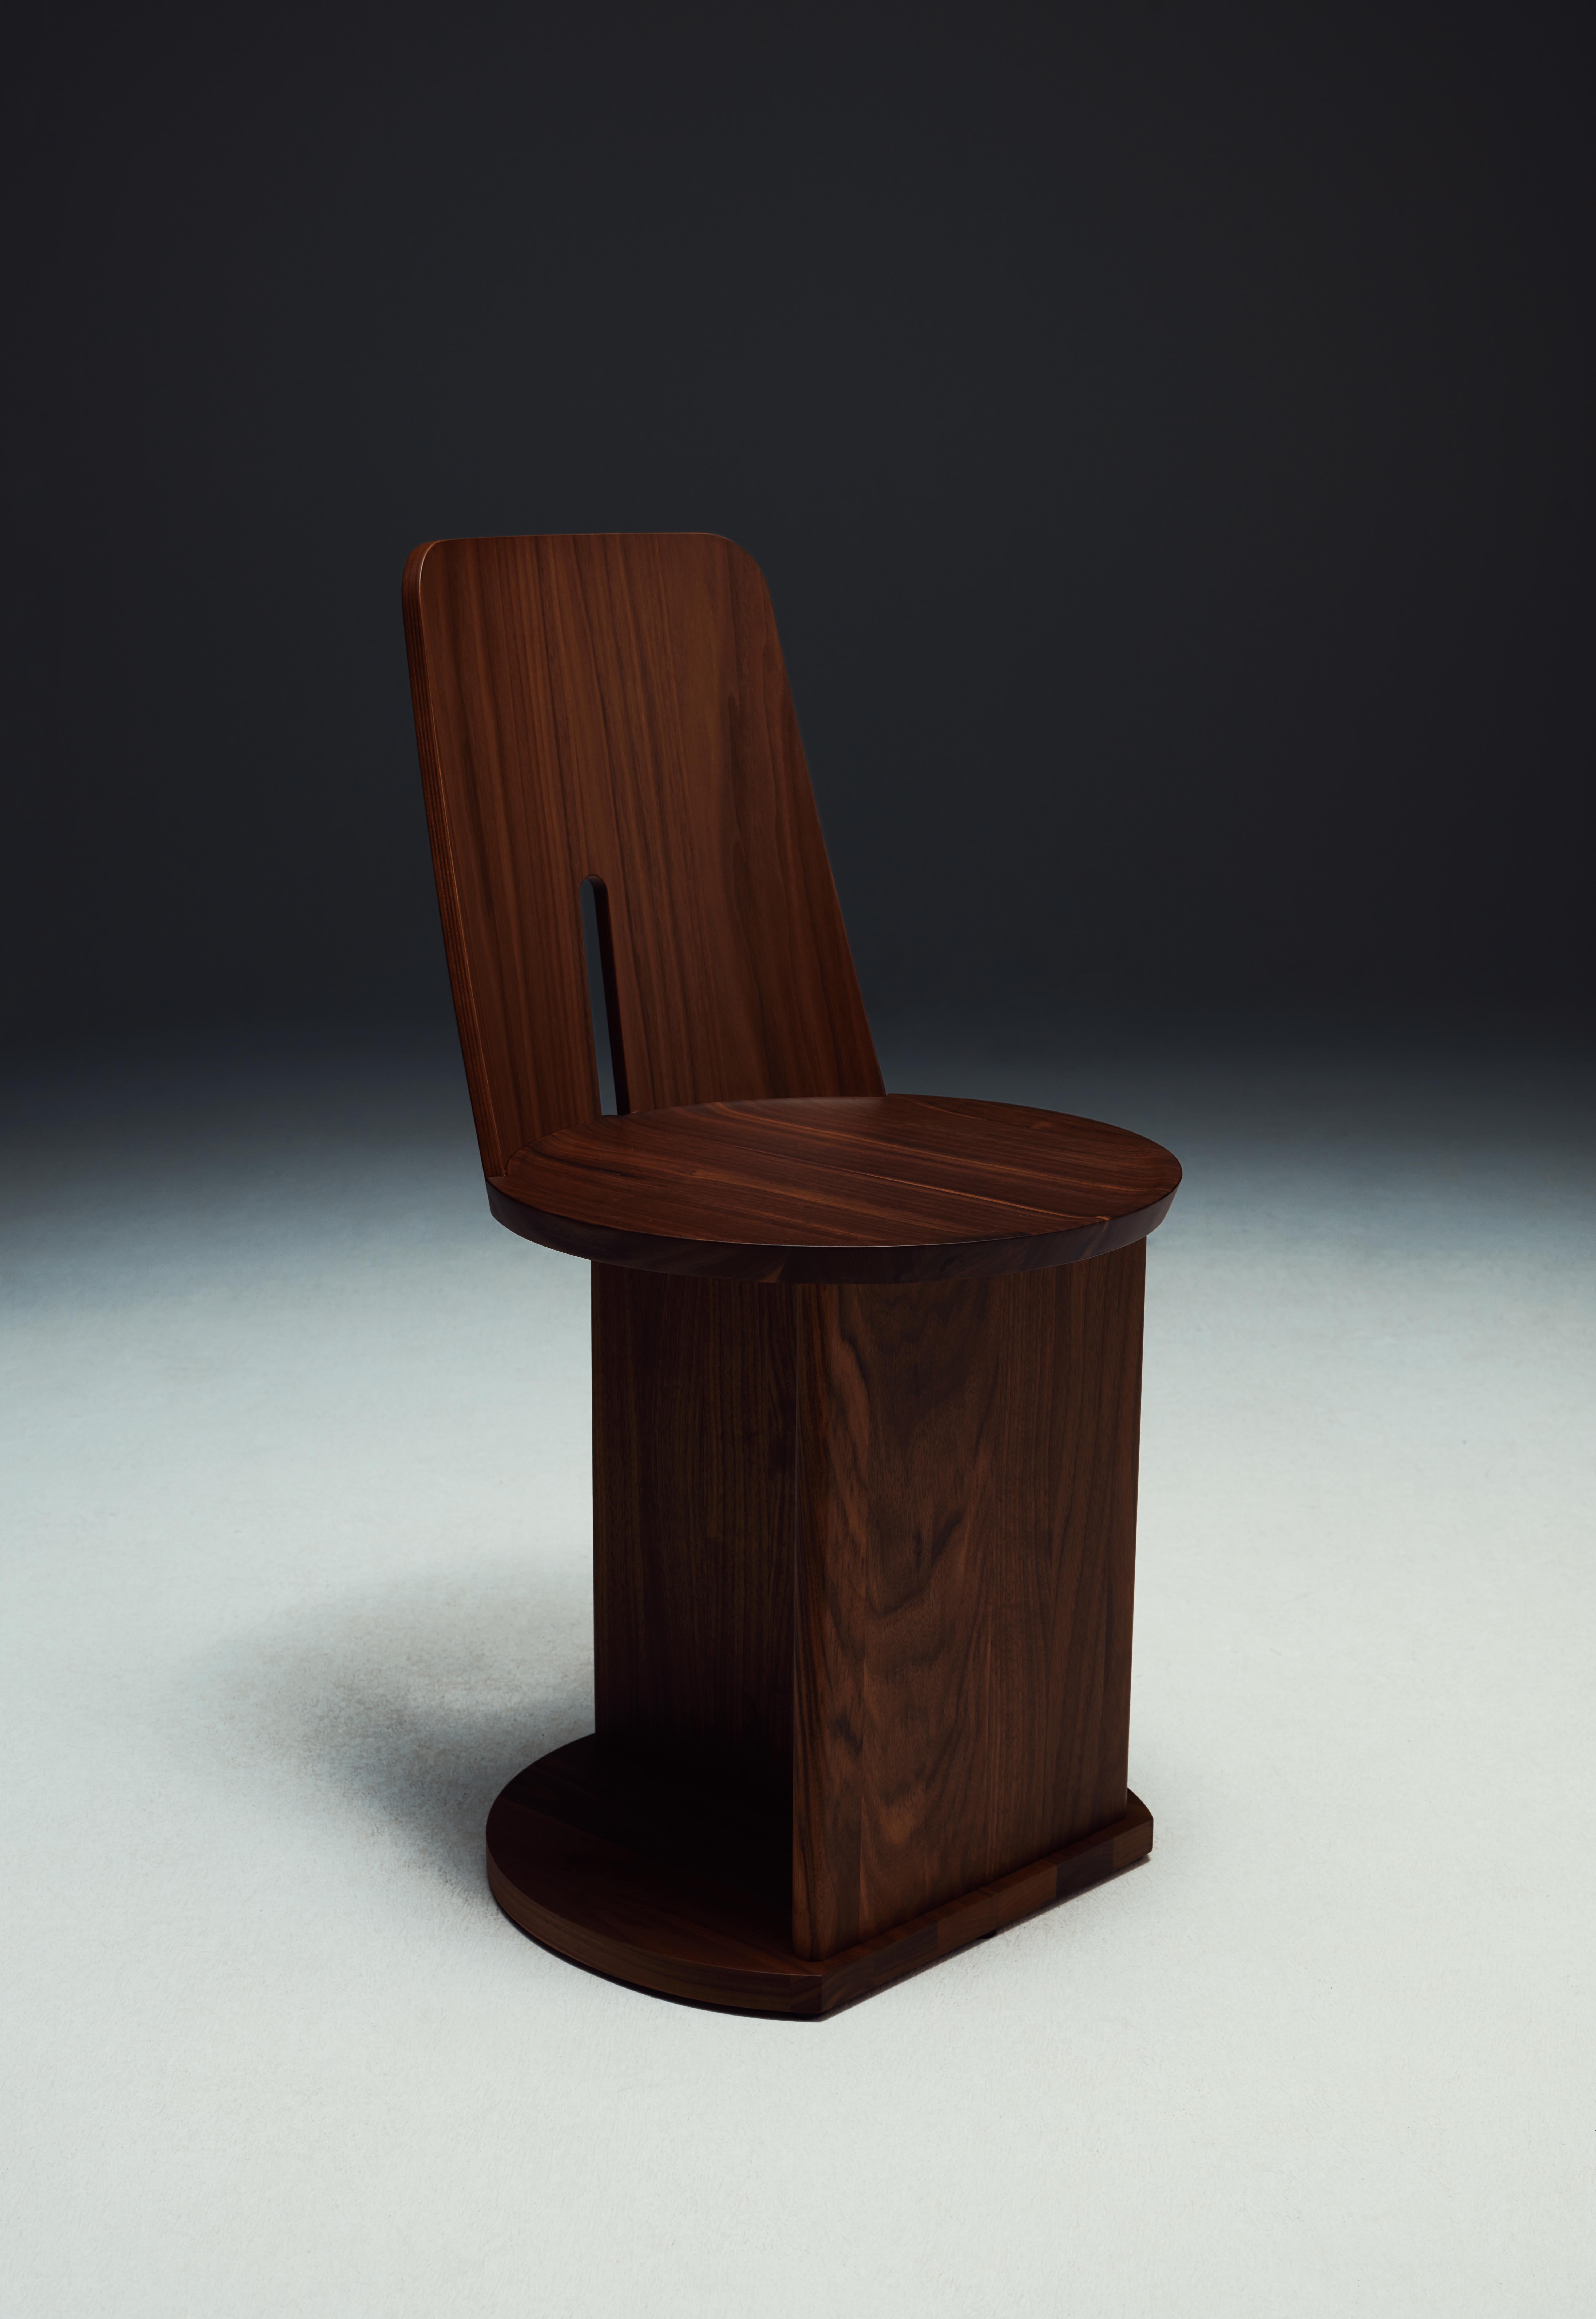 Intersection chair by Neri&Hu
Dimensions: W 42 x D 48 x H 80 cm
Materials: Canaletto walnut solid wood


Founded in 2004 by partners Lyndon Neri and Rossana Hu, Neri&Hu Design and Research Office is an inter-disciplinary architectural design